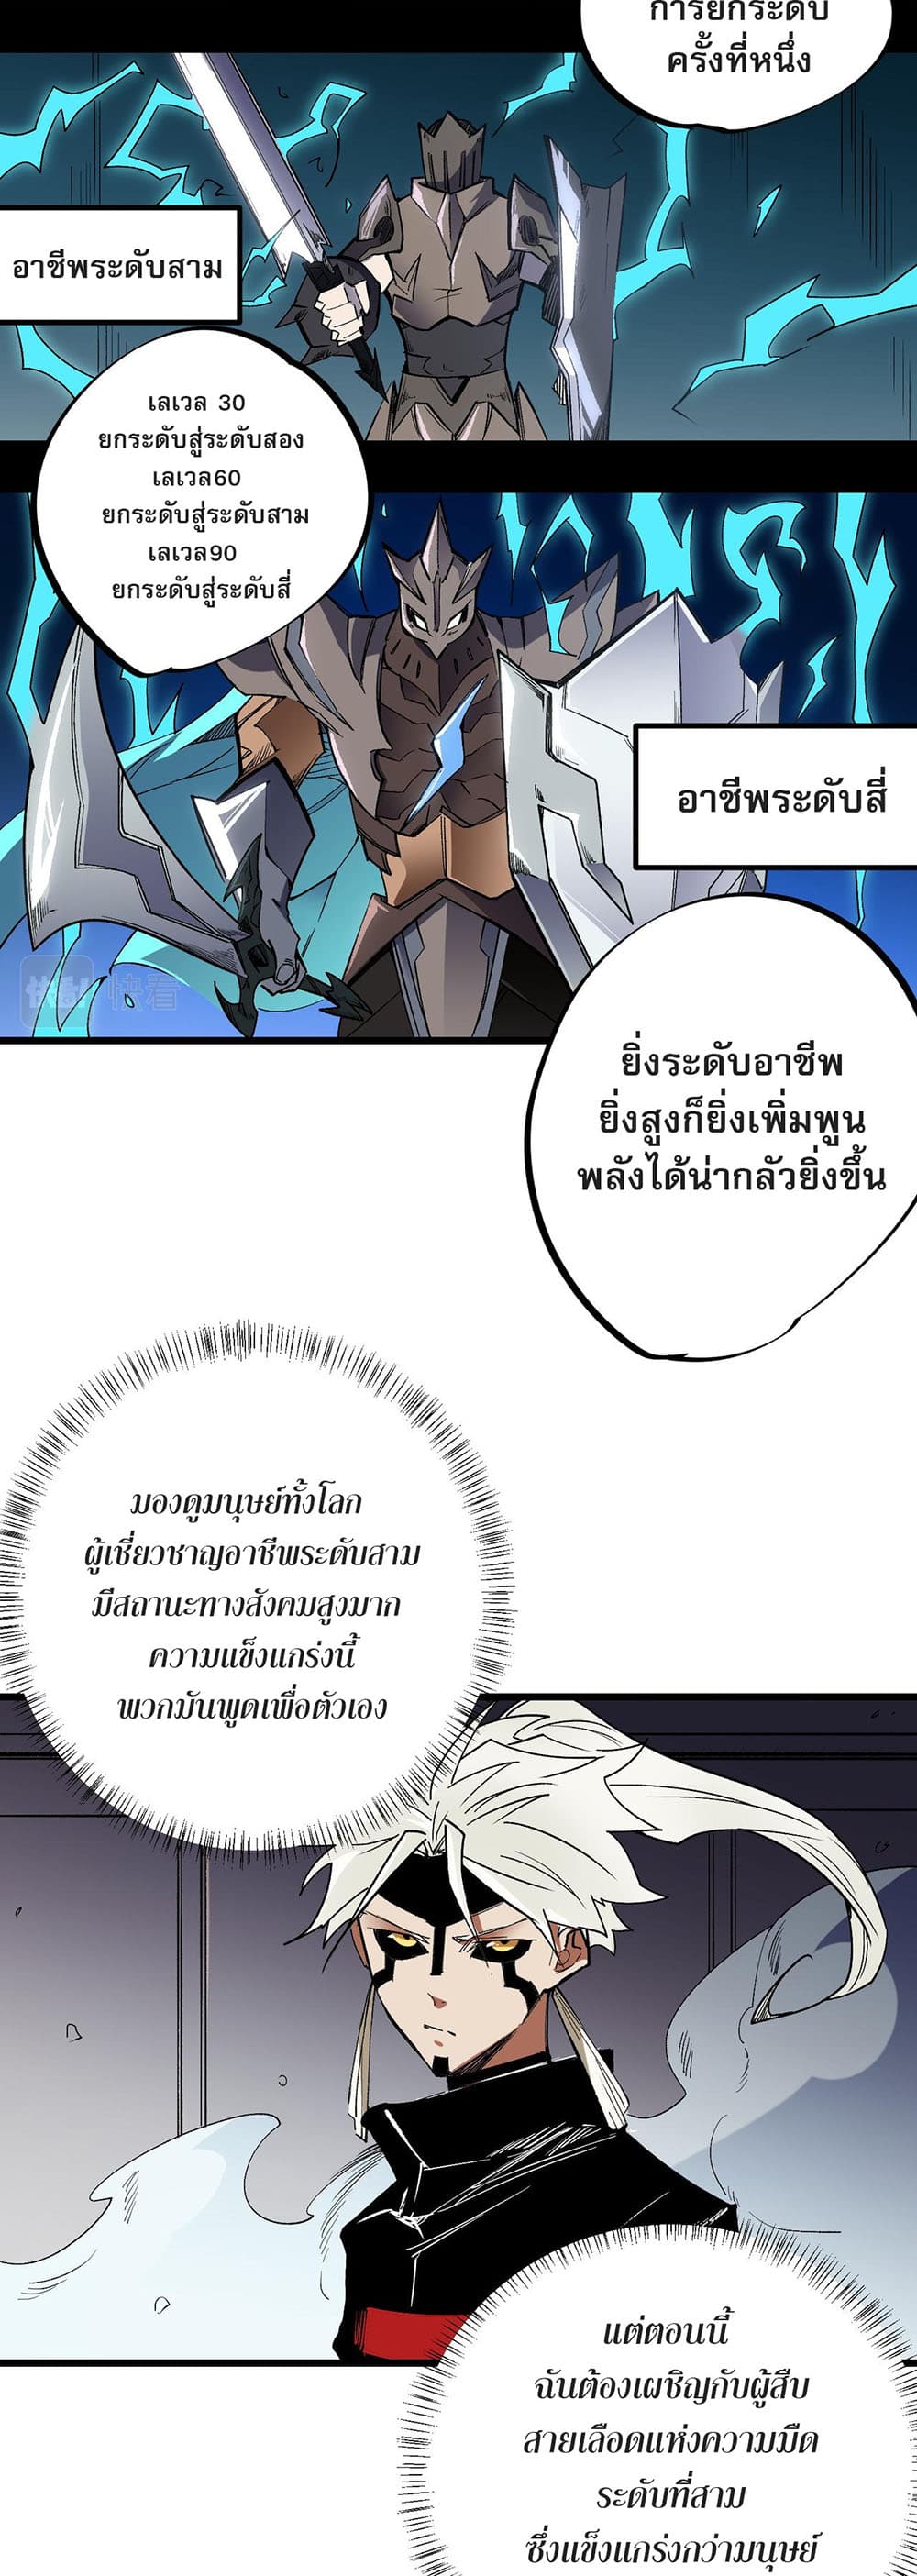 Job Changing for the Entire Population: The Jobless Me Will Terminate the Gods ฉันคือผู้เล่นไร้อาชีพที่สังหารเหล่าเทพ 53-53